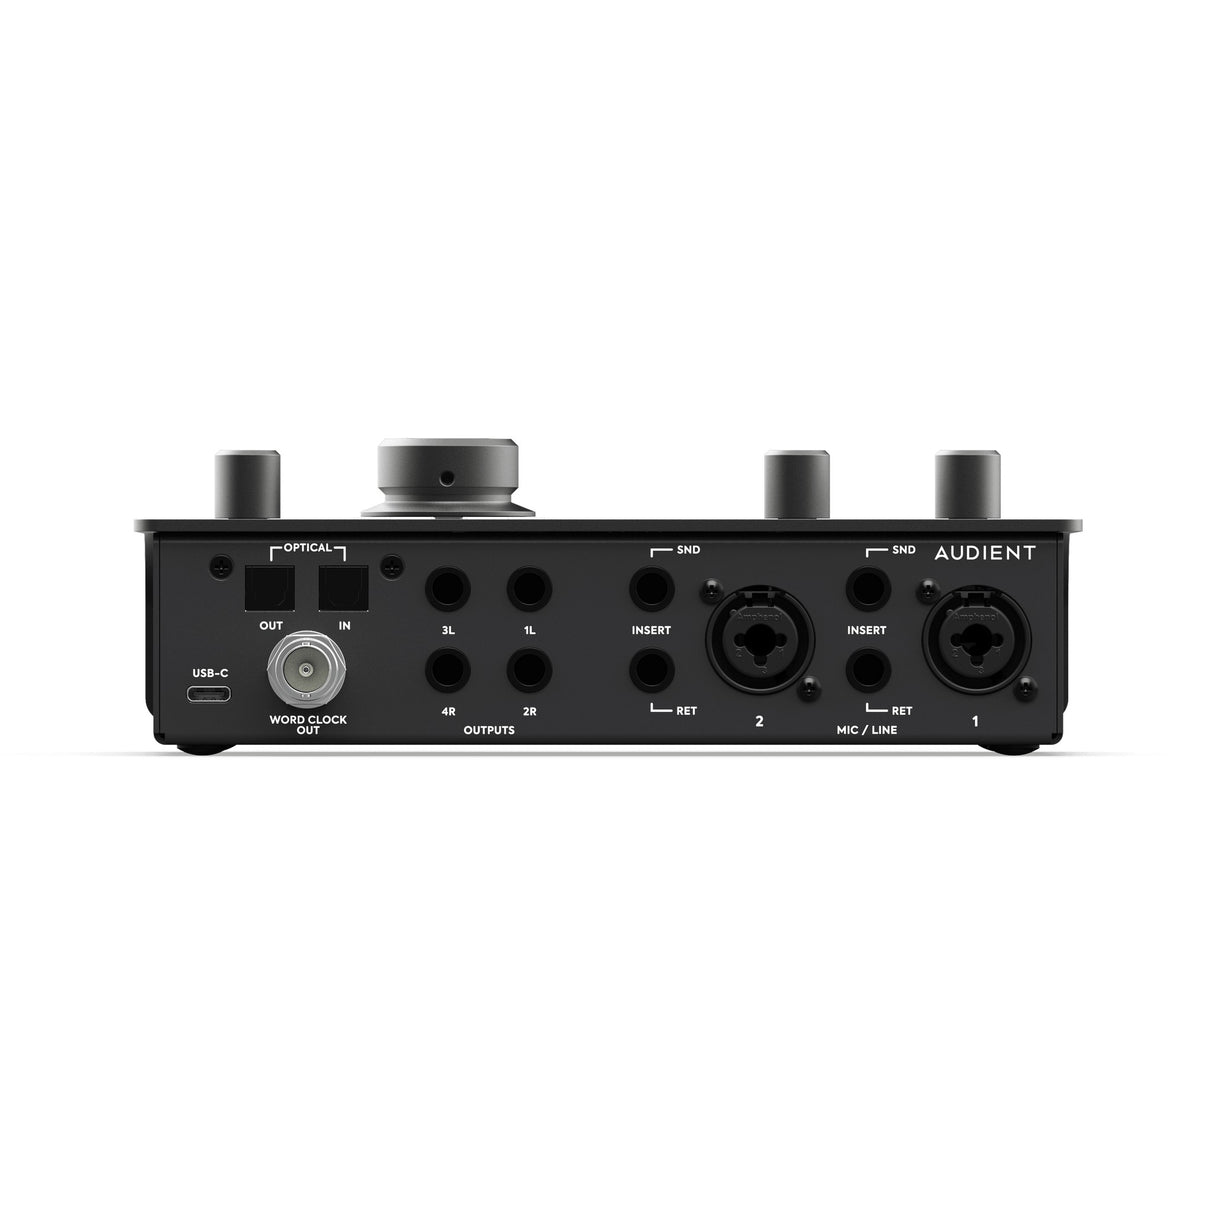 Audient iD24 10-In/14-Out Audio Interface